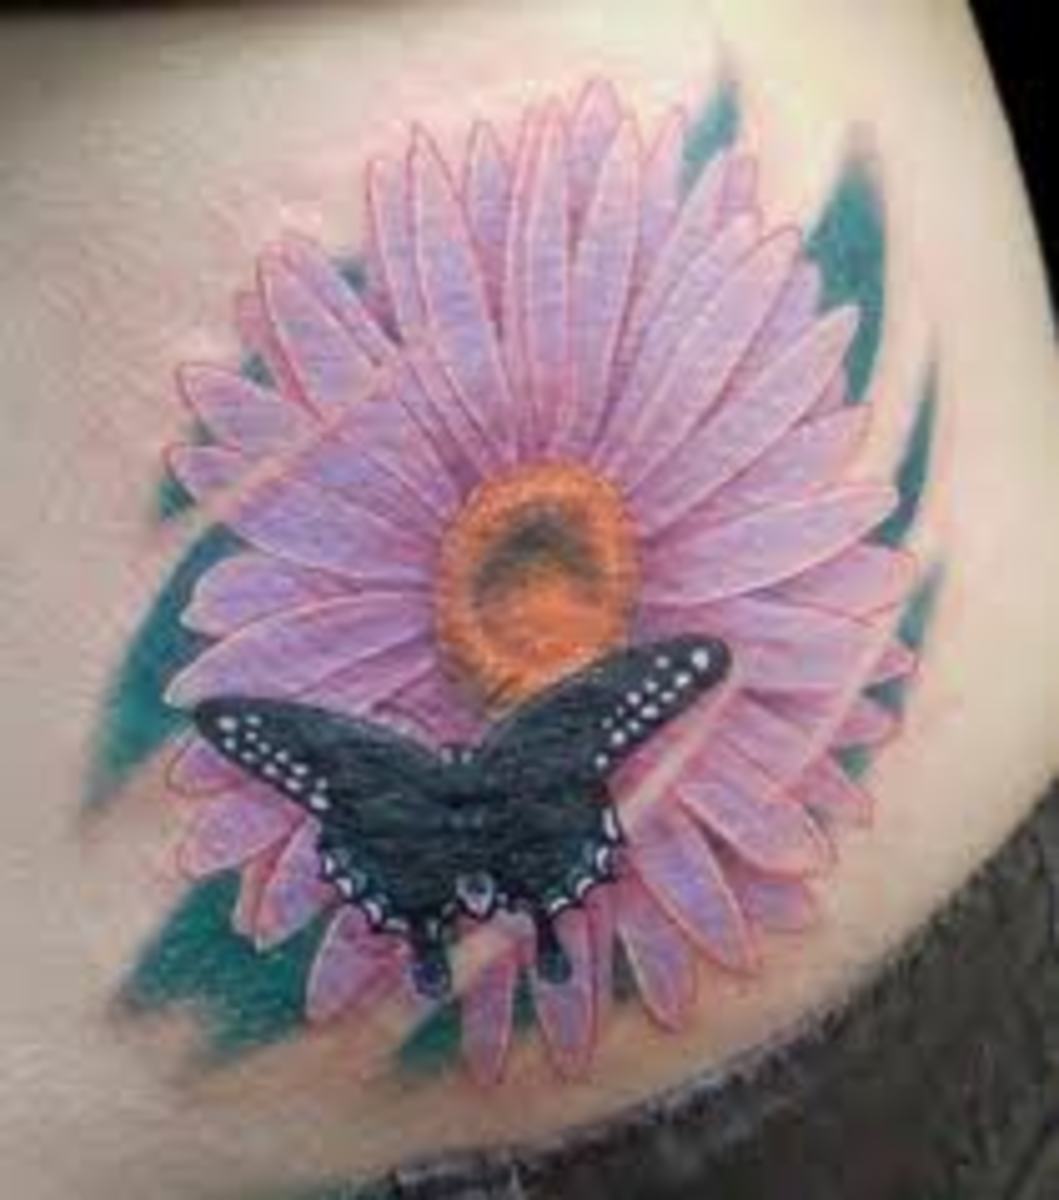 This daisy-and-butterfly tattoo is layered to create a three-dimensional effect.